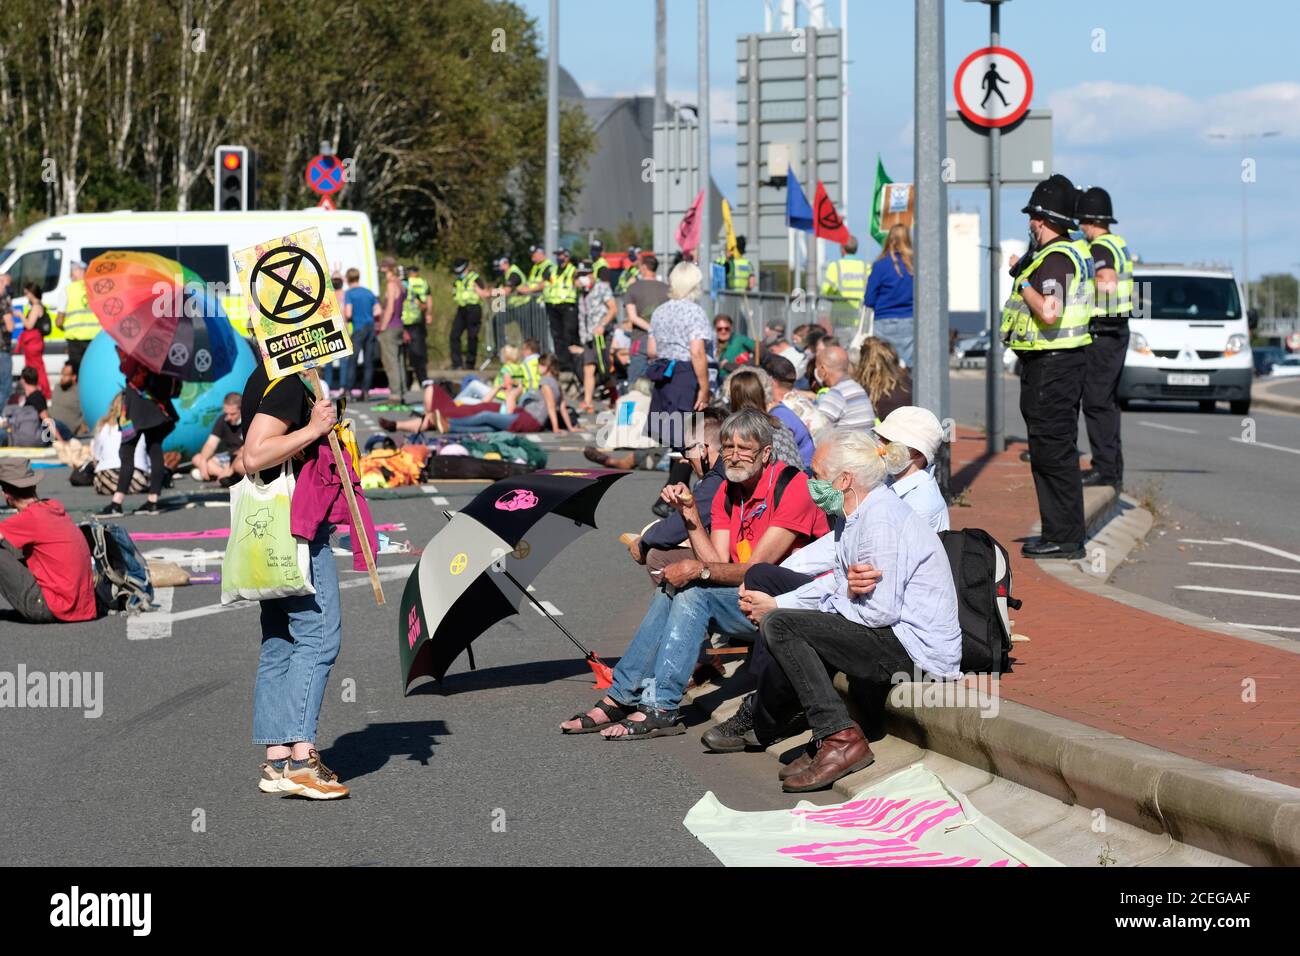 Cardiff, Wales, UK - Tuesday 1st September 2020 - Extinction Rebellion ( XR ) protesters block the road outside the Welsh Office in Cardiff Bay with a large Police presence looking on. XR have set up a base camp outside Cardiff City Hall in preparation for a week of action protesting against climate change and the future of society. Photo Steven May / Alamy Live News Stock Photo